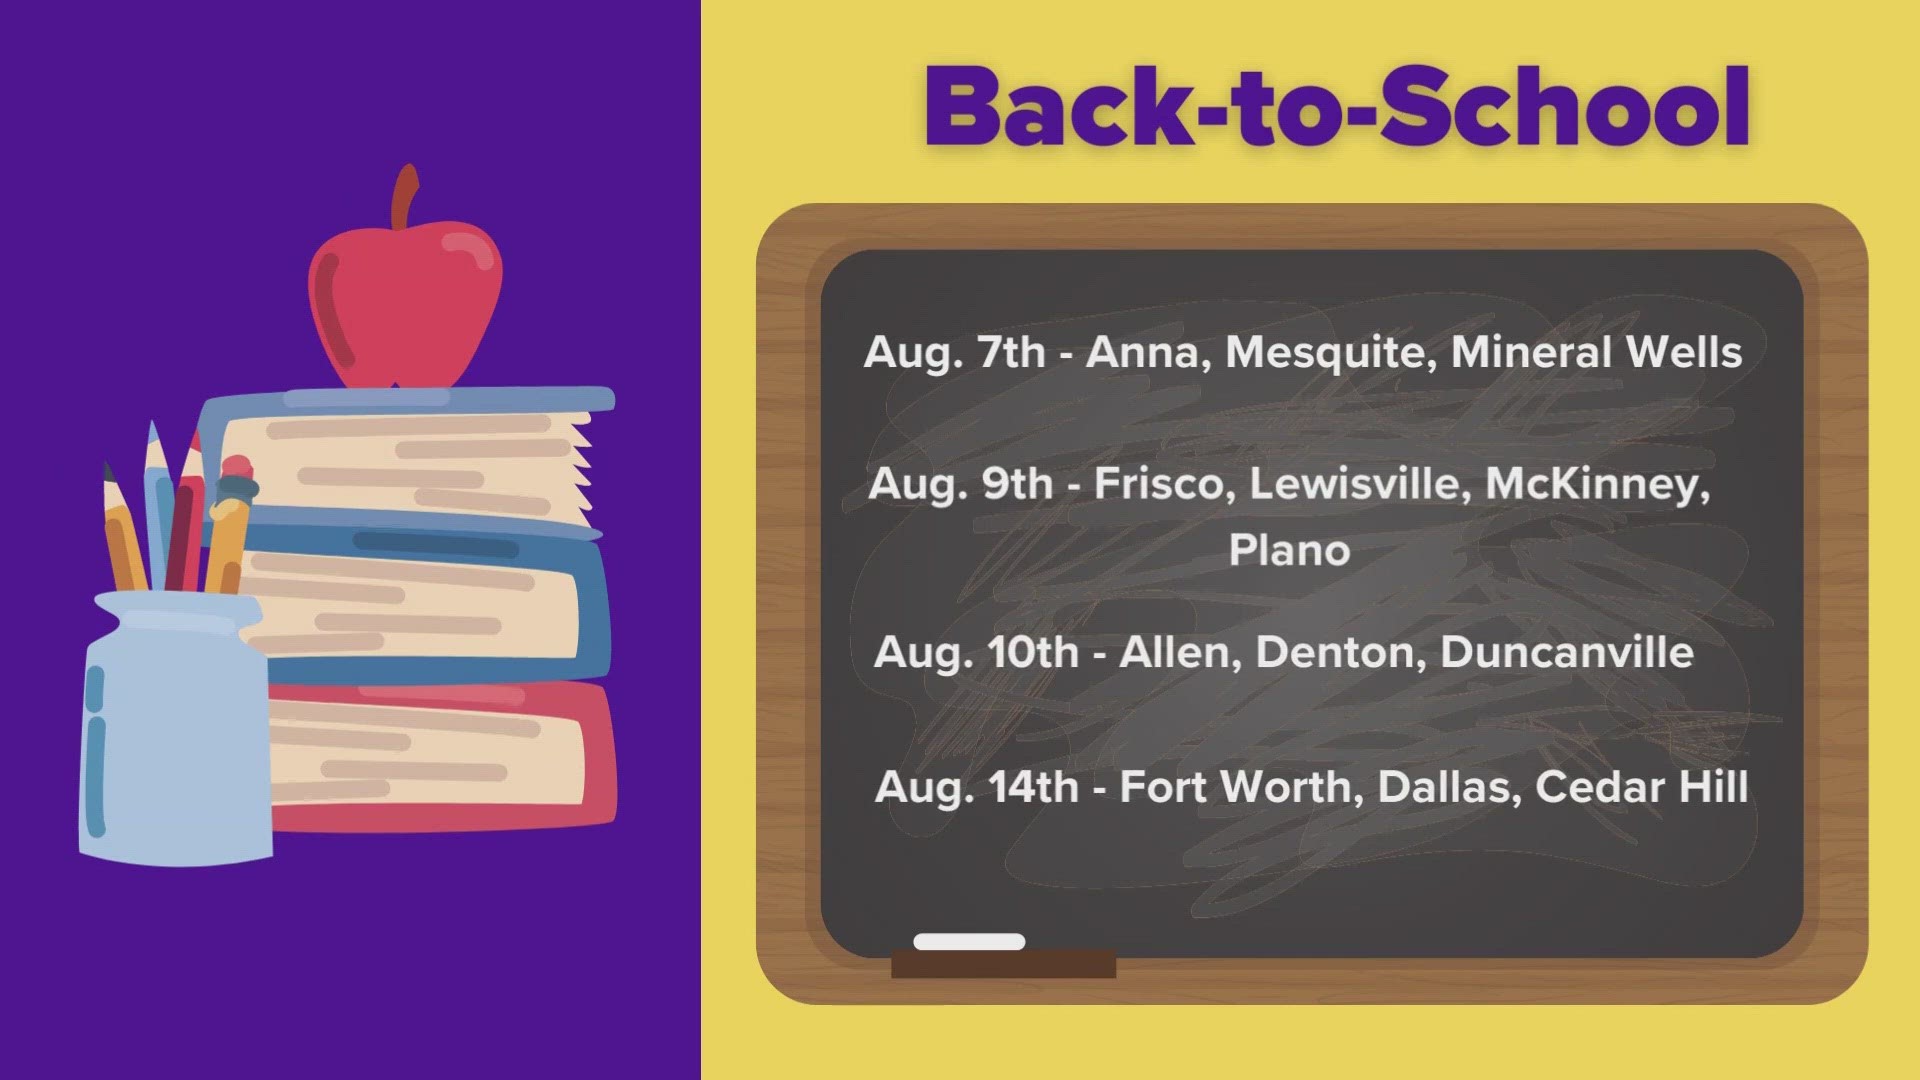 When does school start in Central Texas? Here's the list of start dates